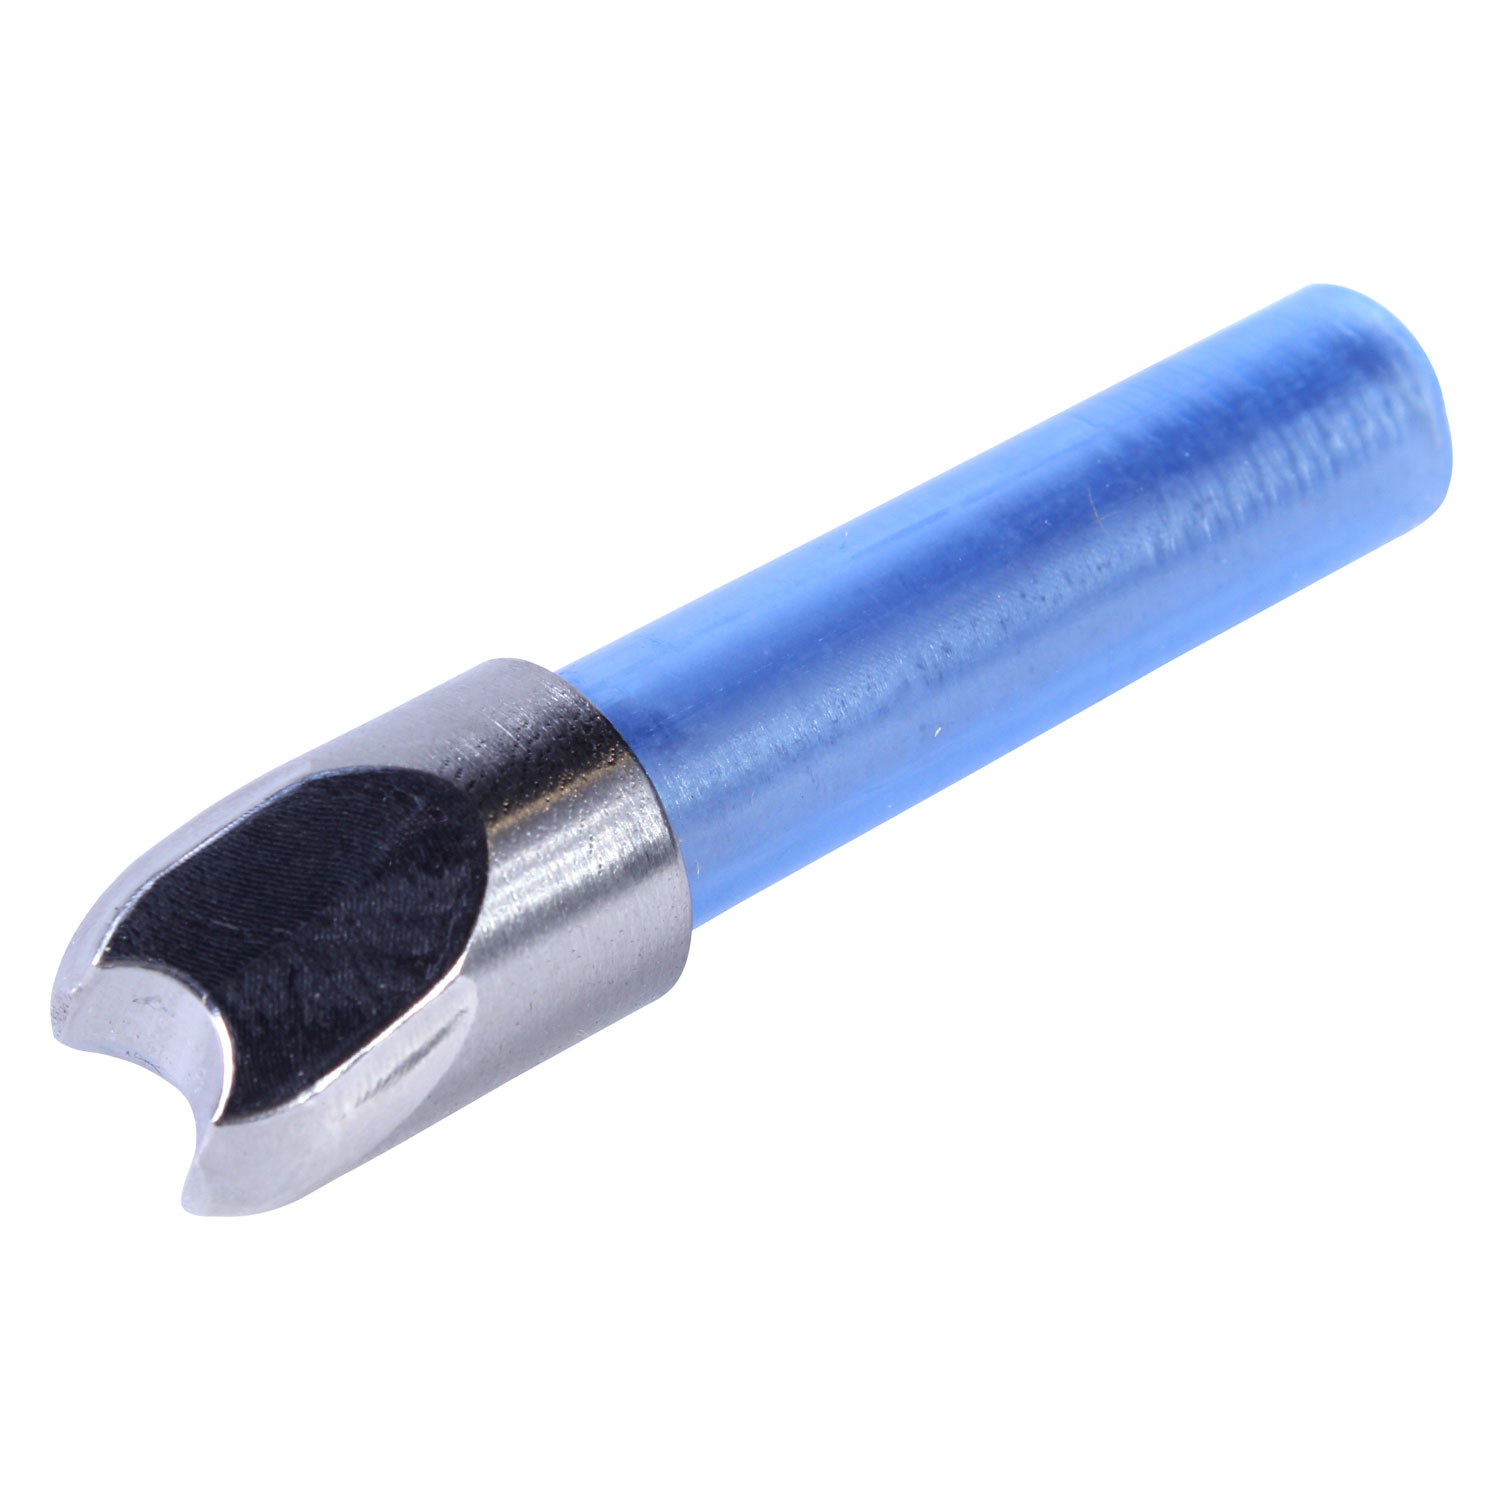 Installation tool for 115° Sap Spout and tubing saddles